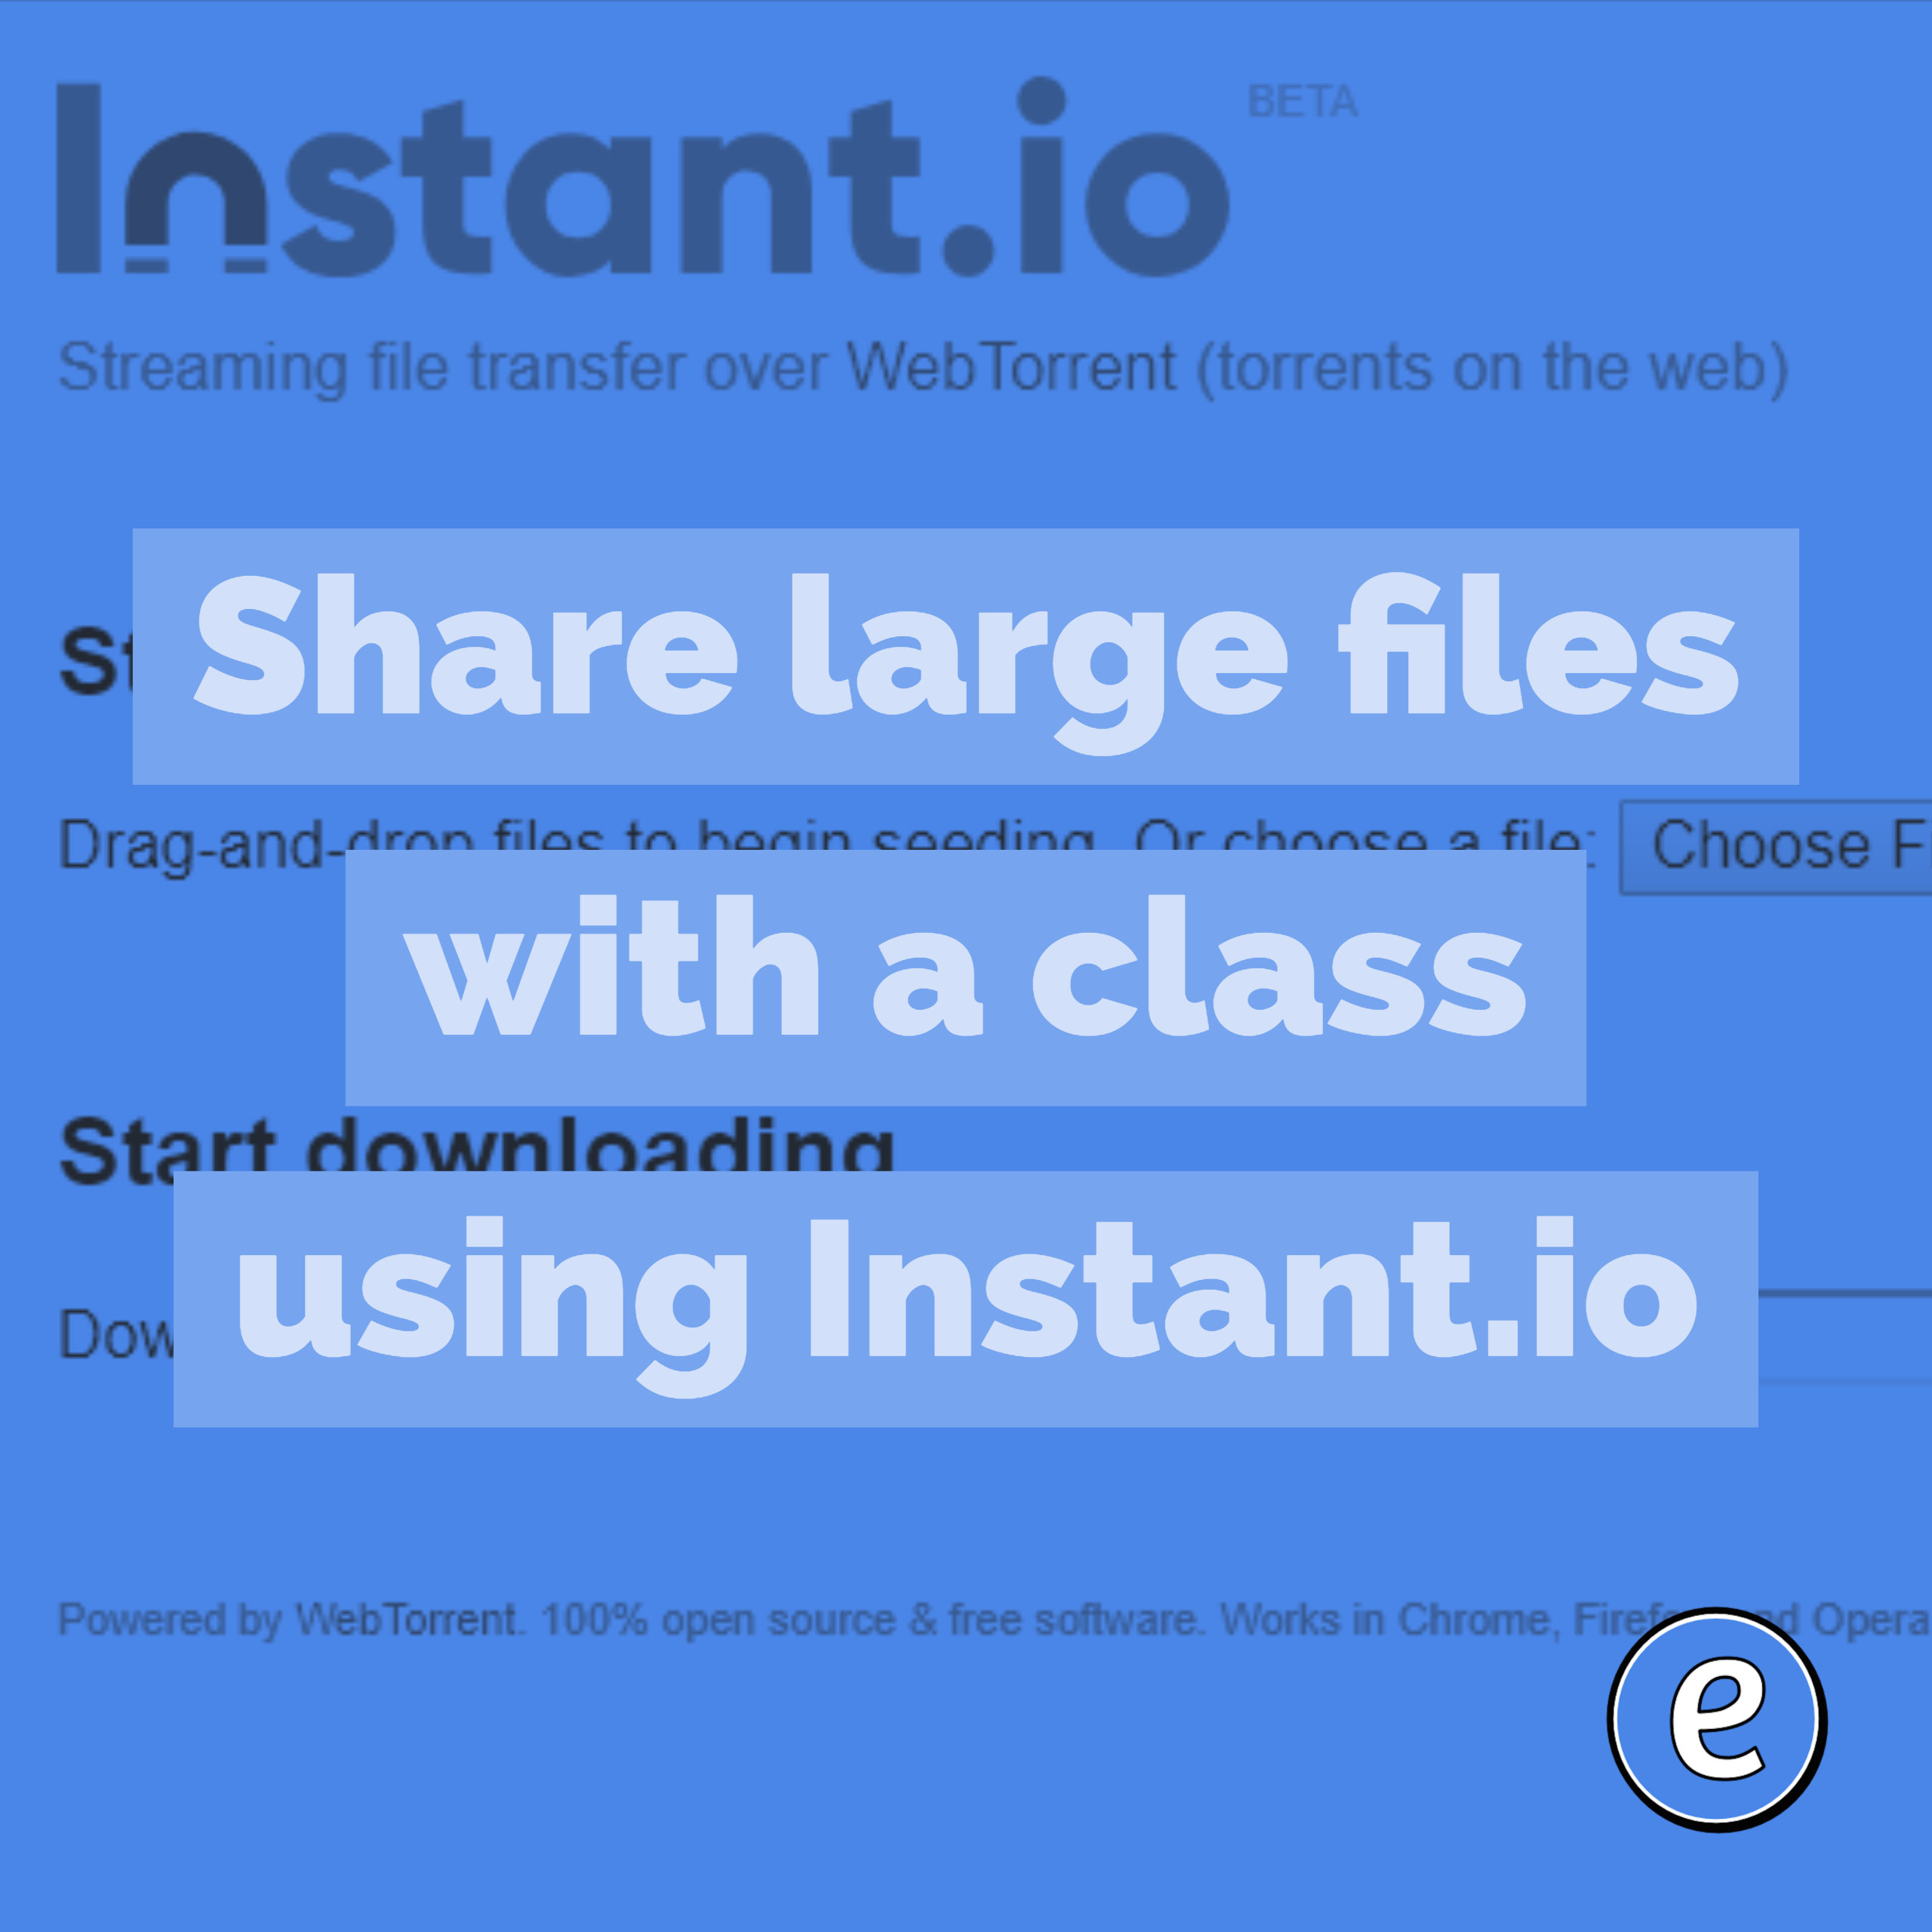 Share large files with a class using Instant.io